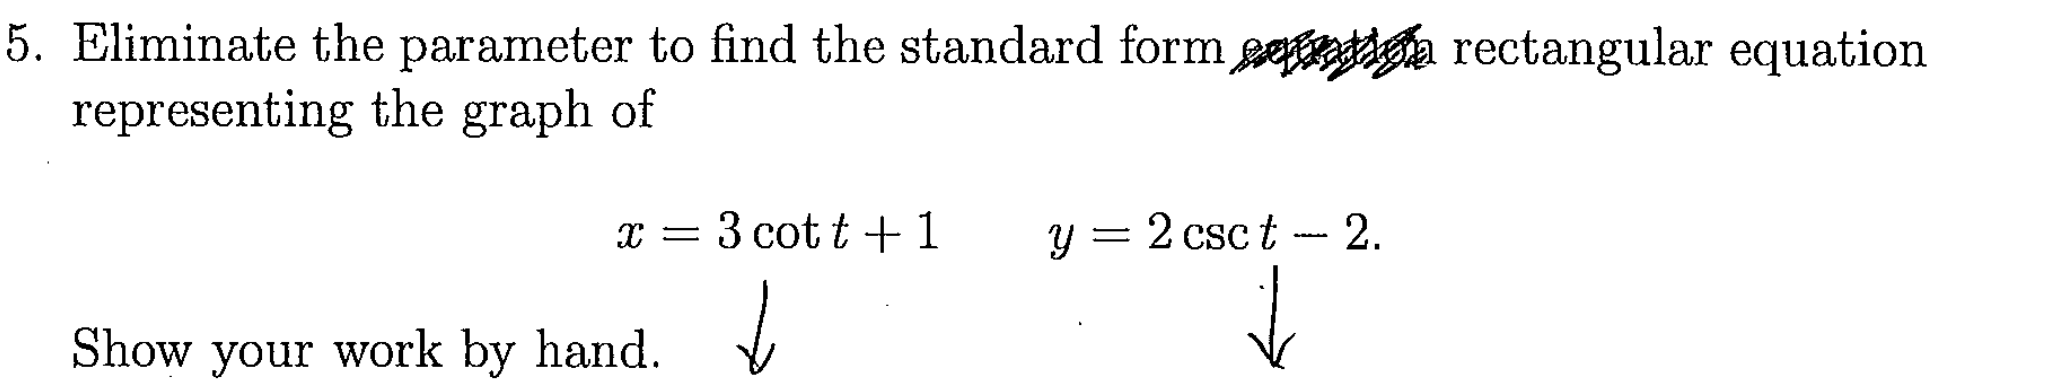 . Eliminate the parameter to find the standard form gedaa rectangular equation
representing the graph of
x = 3 cot t + 1
y = 2 csc t -- 2.
Show your work by hand.
